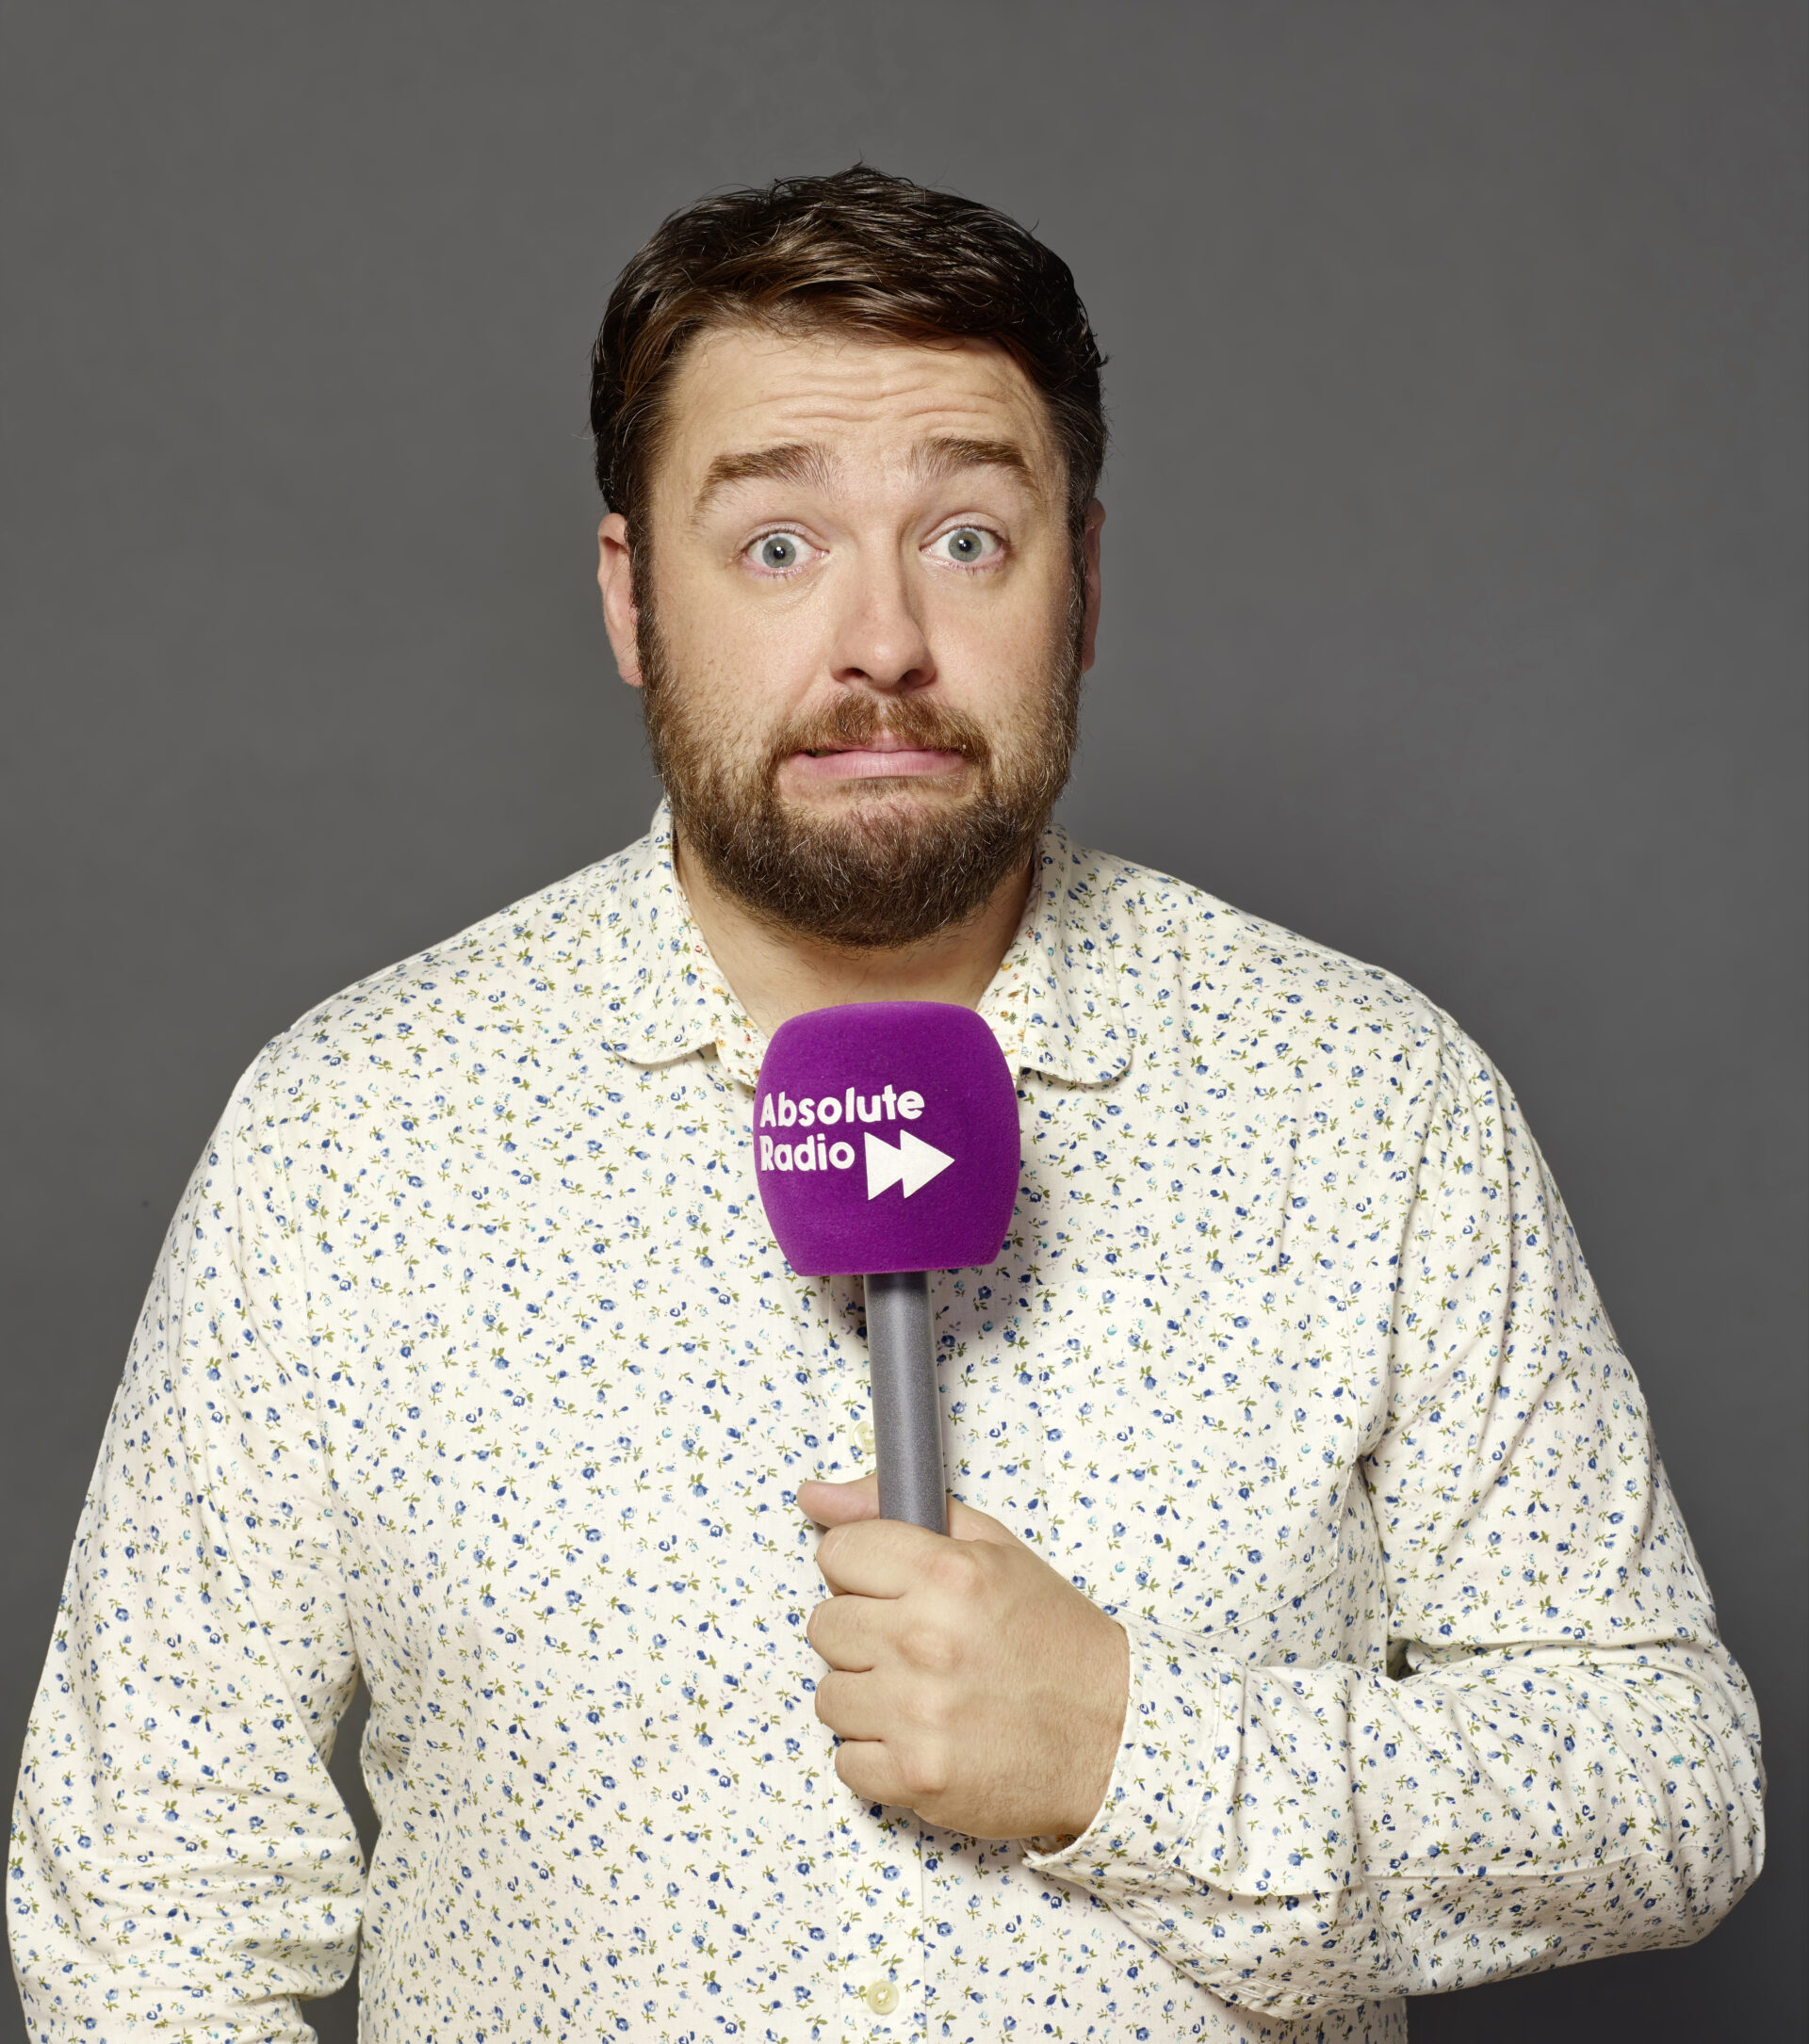 Absolute Radio teams up with Fun Kids Radio for Bedtime Story – featuring Jason Manford